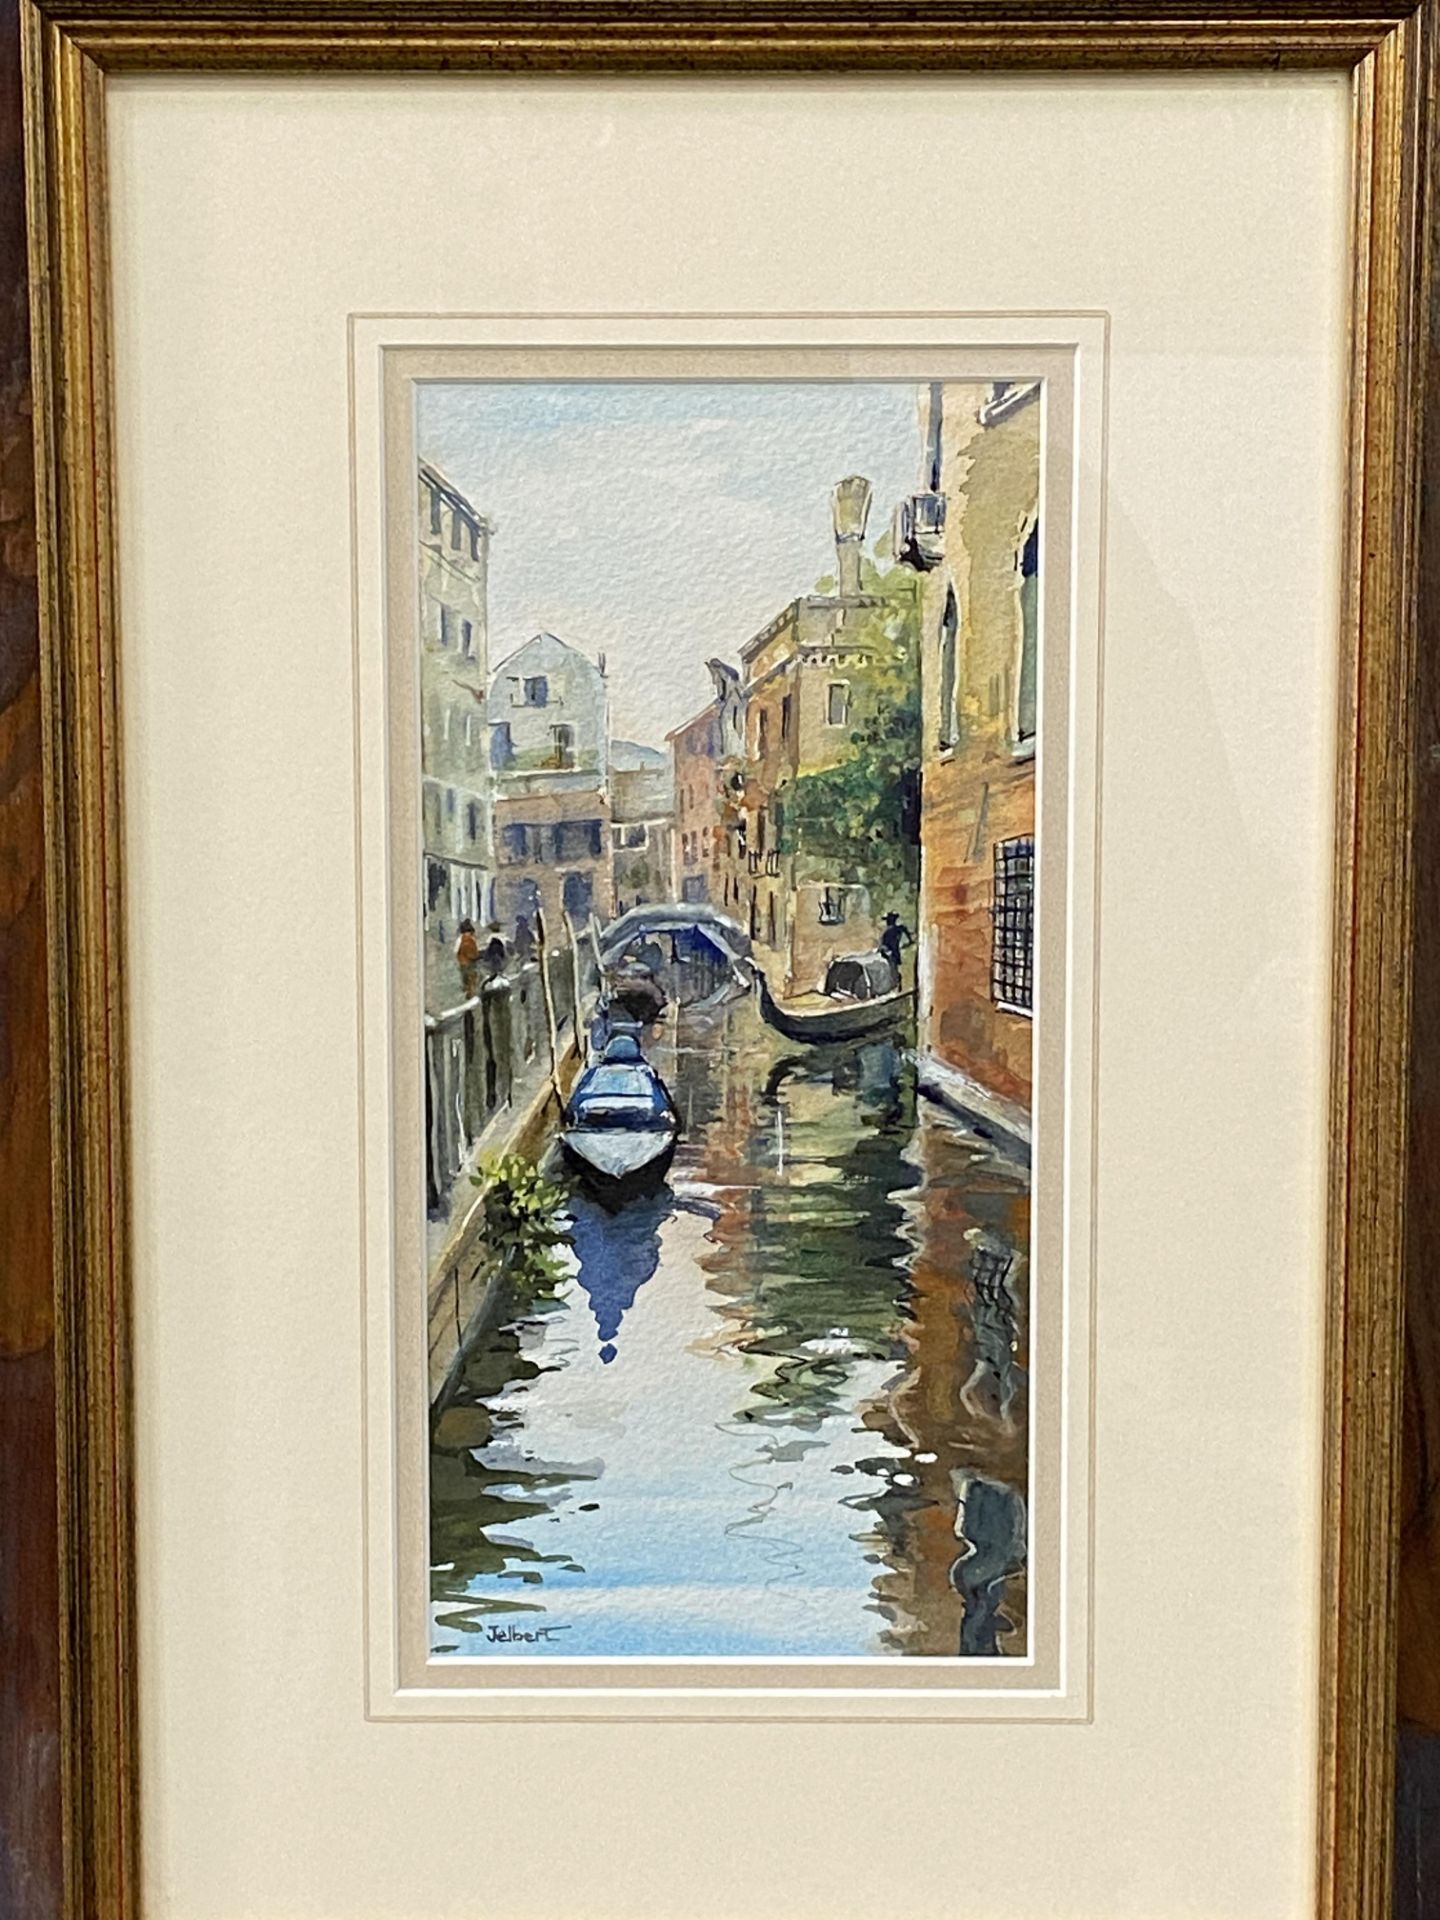 Framed and glazed watercolour "Venice Canal" by Wendy Jelbert - Image 3 of 3